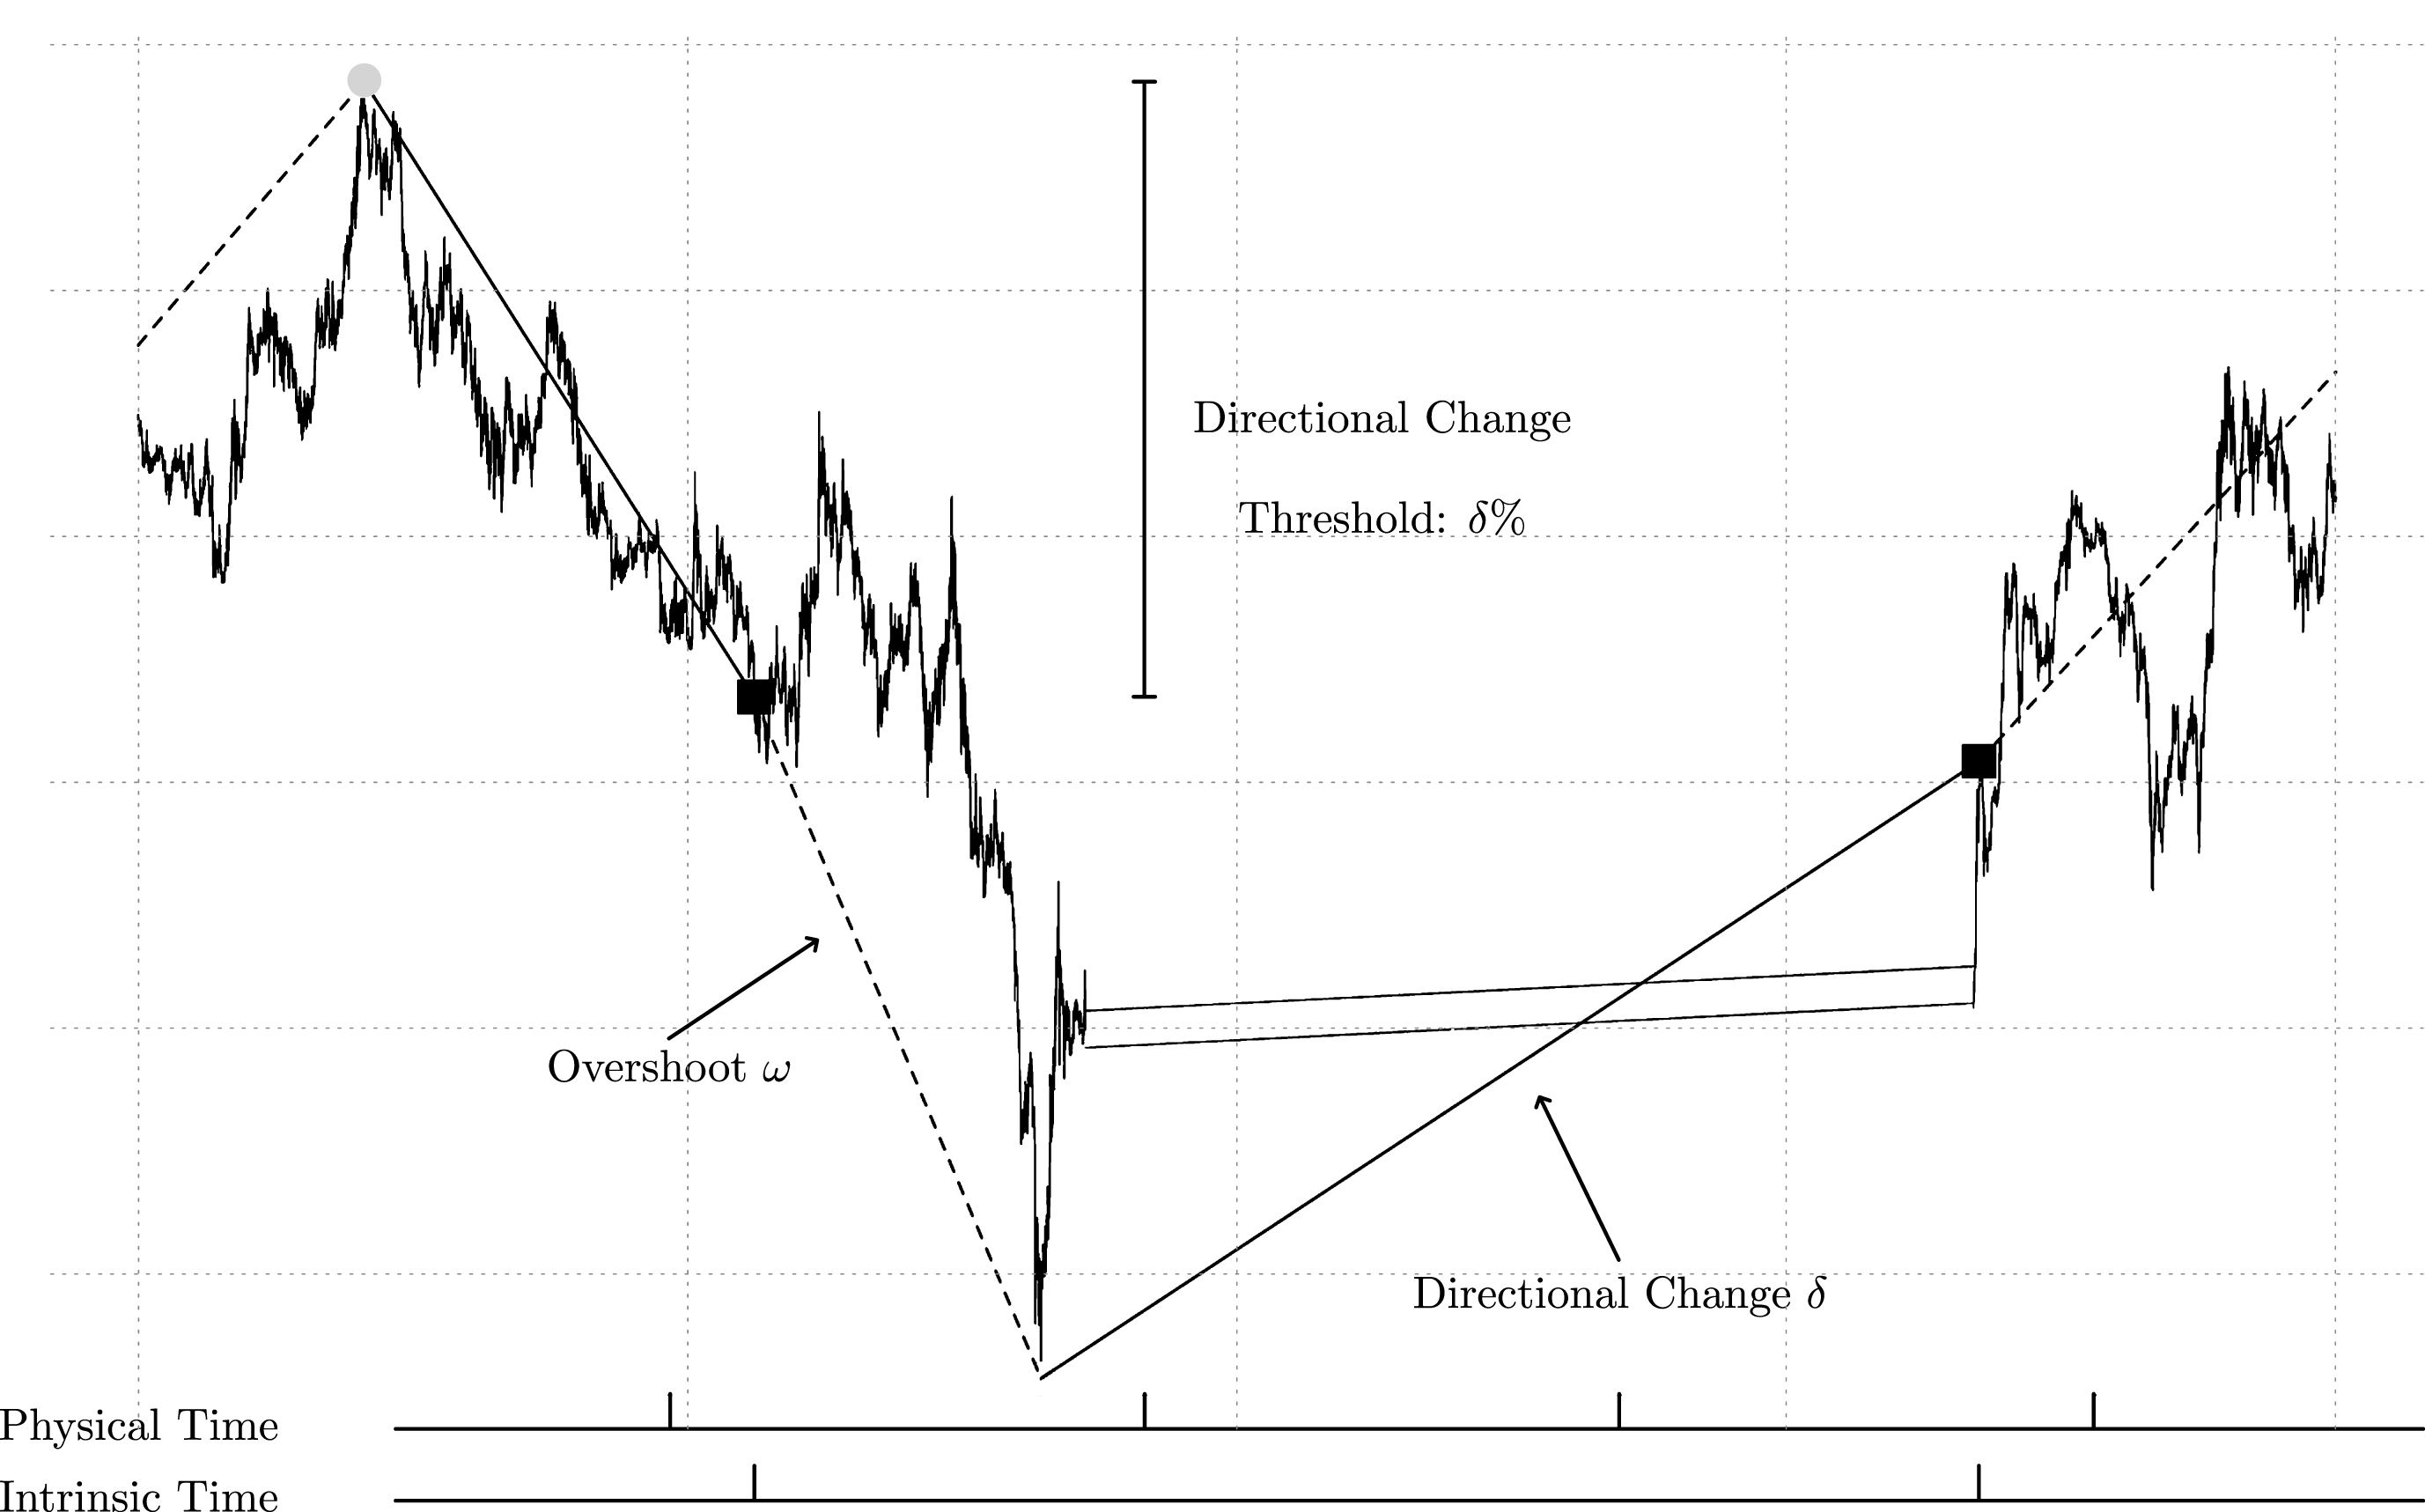 Price evolution example over a week-end. Directional change events (squares) act as natural dissection points, 
decomposing a total-price move between two extremal price levels 
(bullets) into so-called directional-change (solid lines) and overshoot 
(dashed lines) sections. Time scales depict physical time ticking evenly 
across different price curve activity regimes, whereas intrinsic time 
triggers only at directional change events, independent of the notion of 
physical time. The time period where the exchange rate does not change corresponds to the weekend.